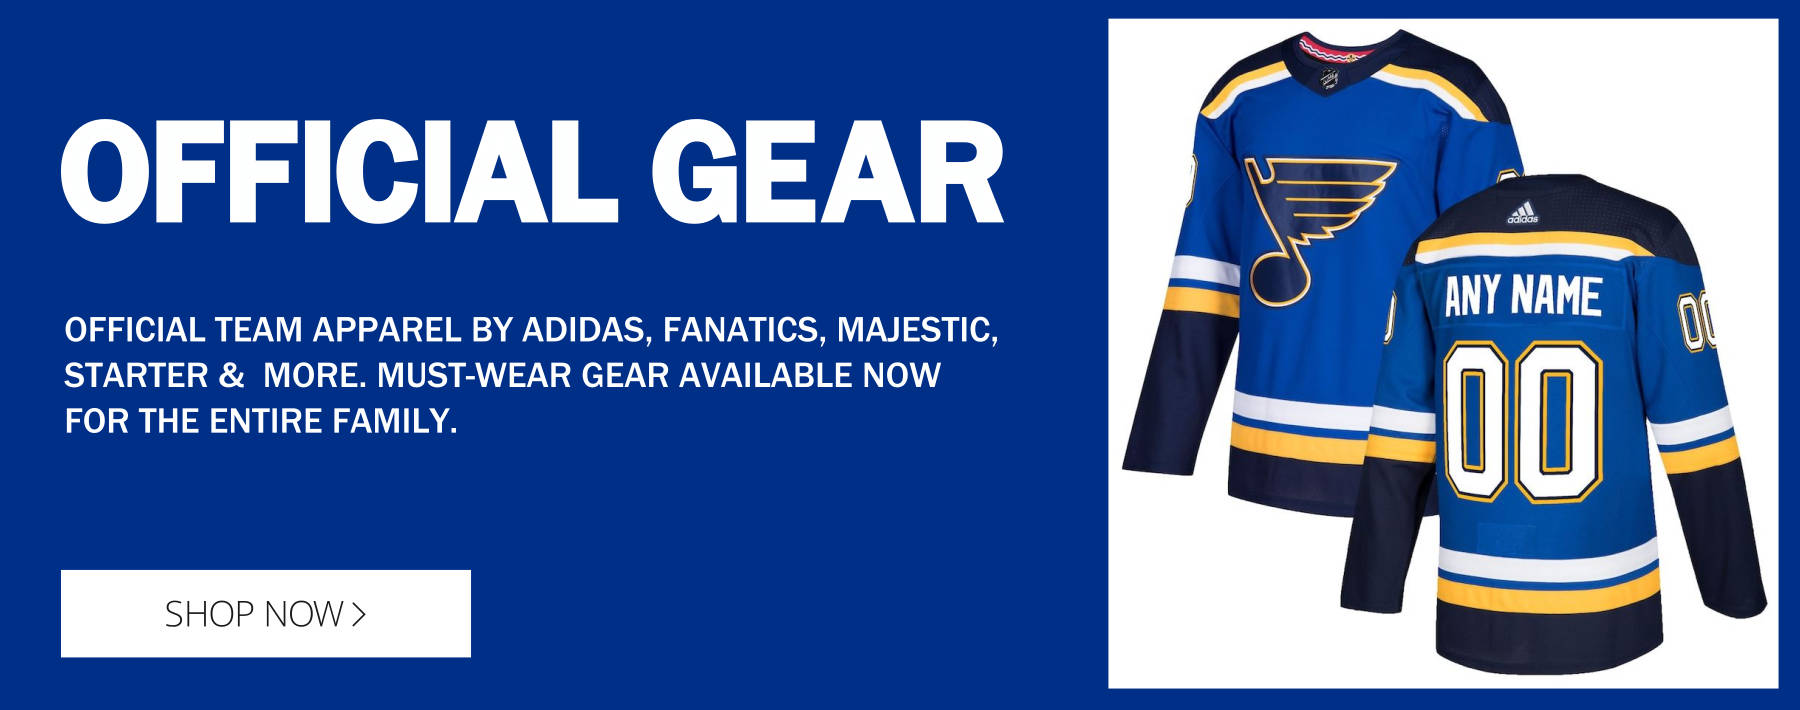 Officially Licensed St. Louis Blues Gear and Merchandise 